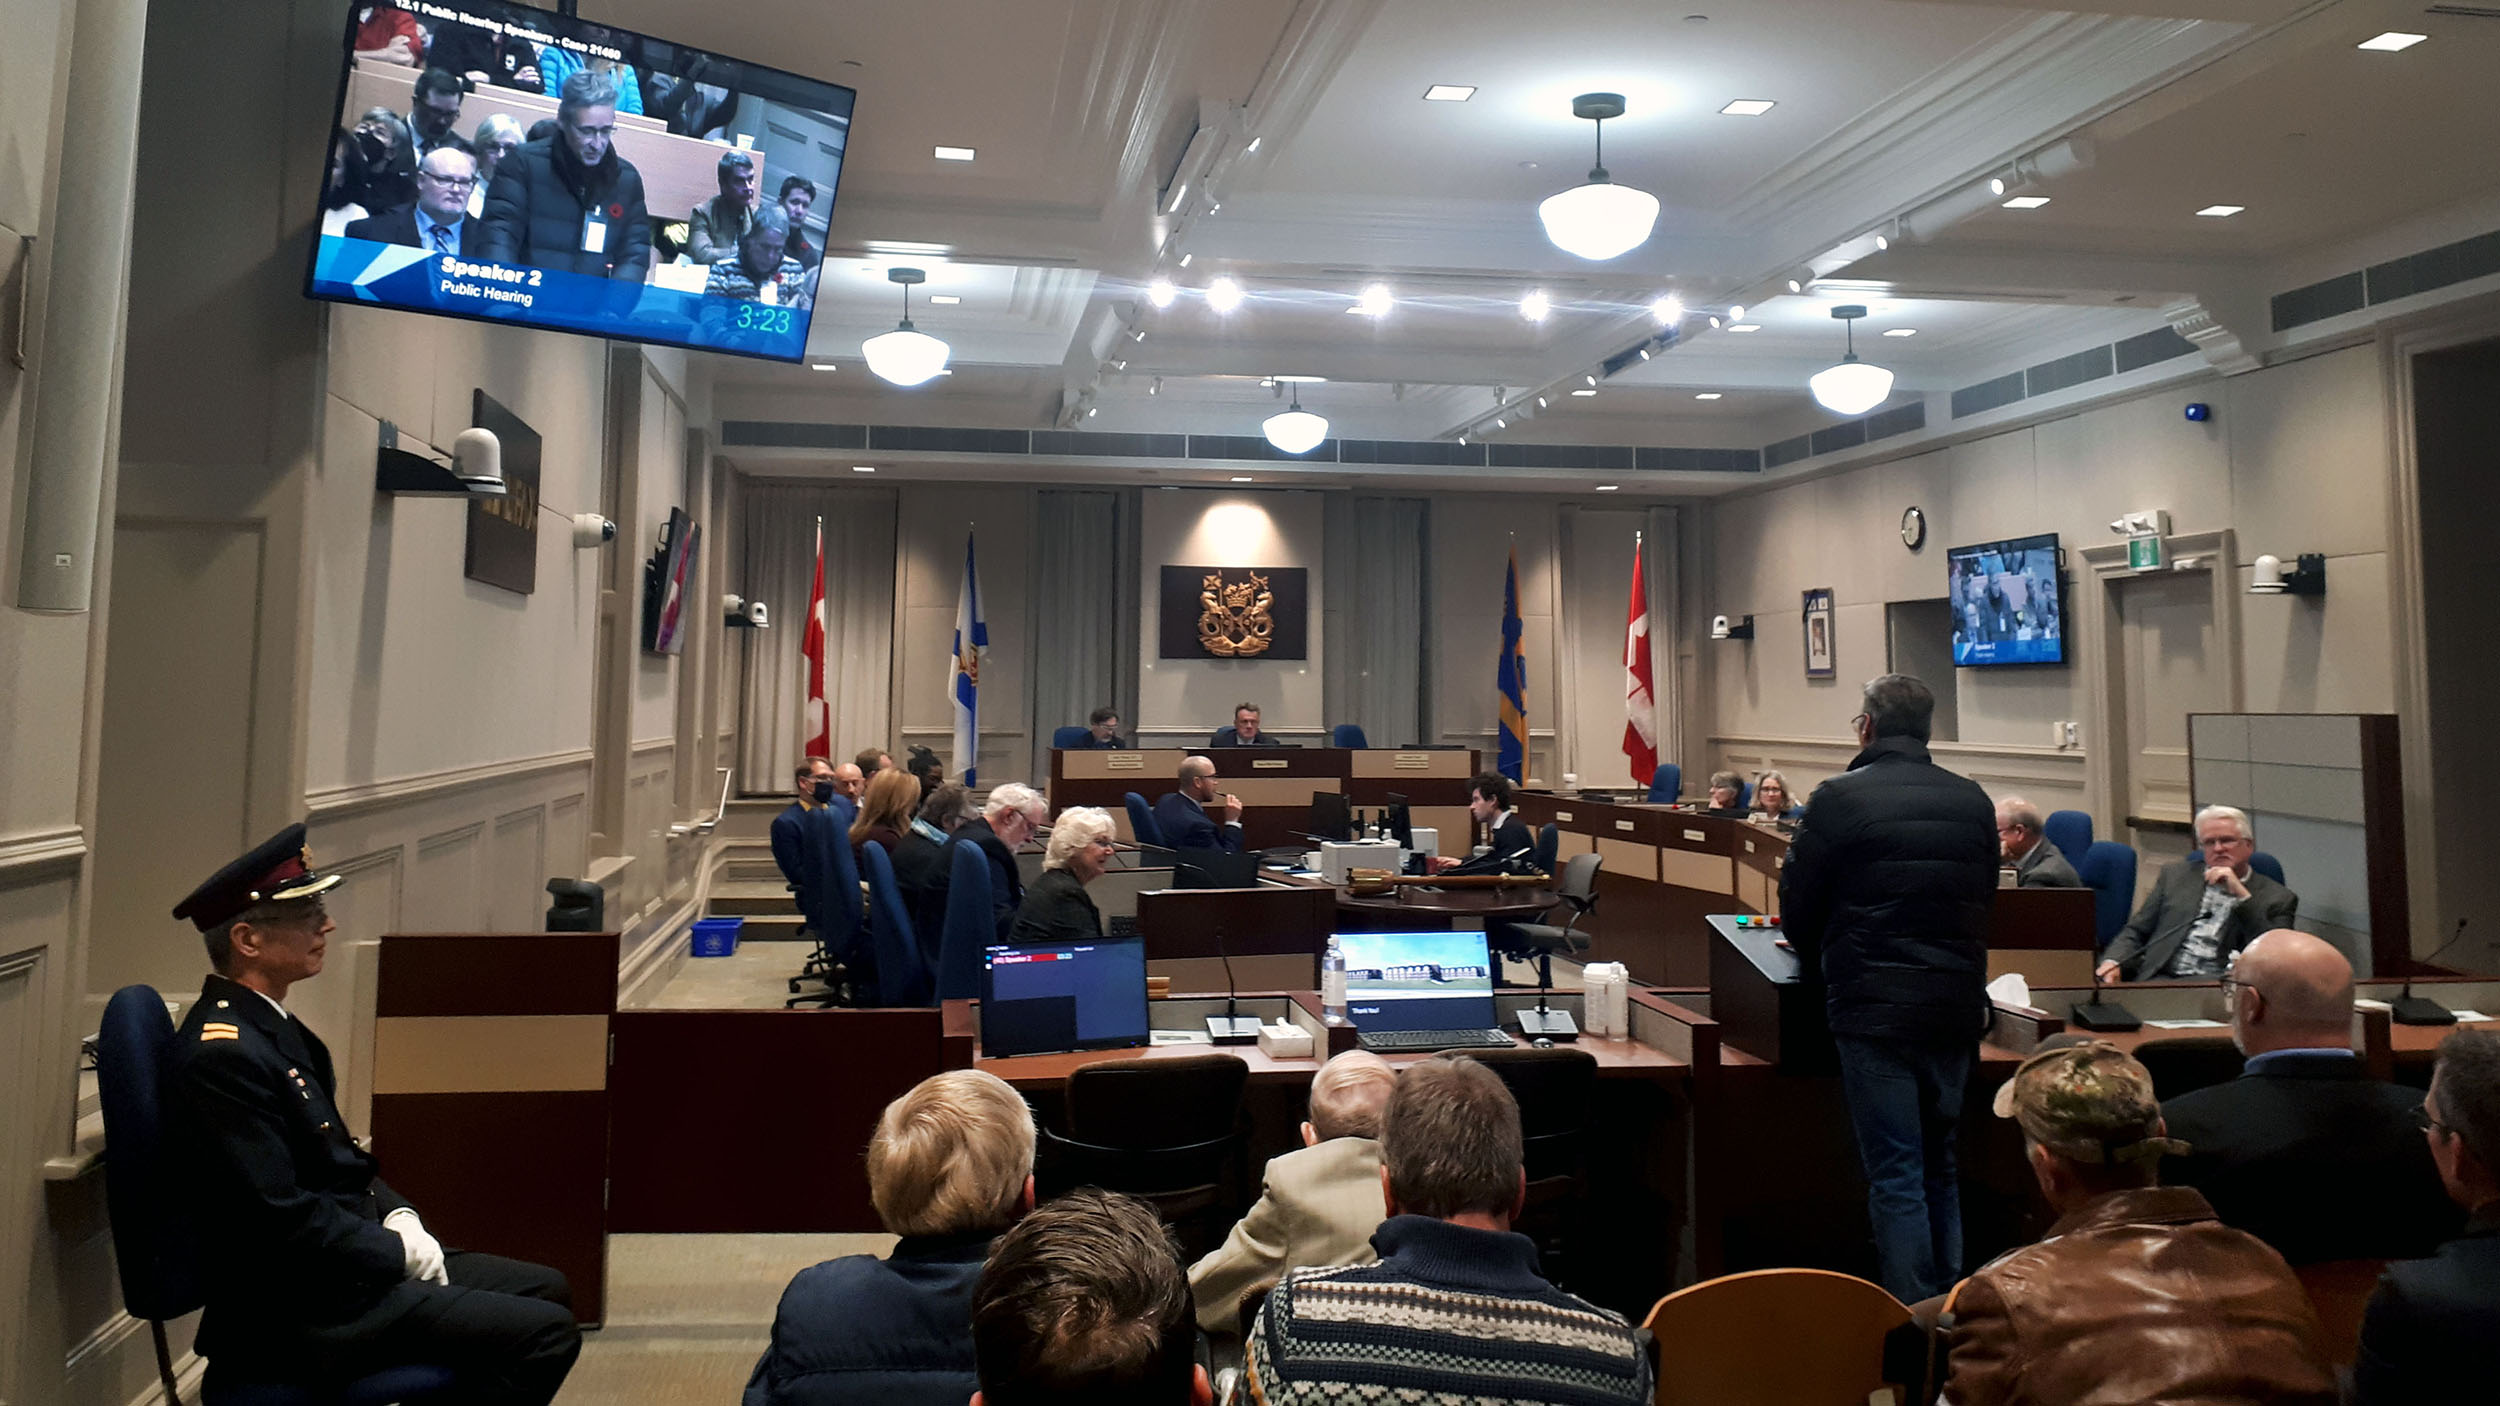 Council public hearing with a presenter at the front of the room